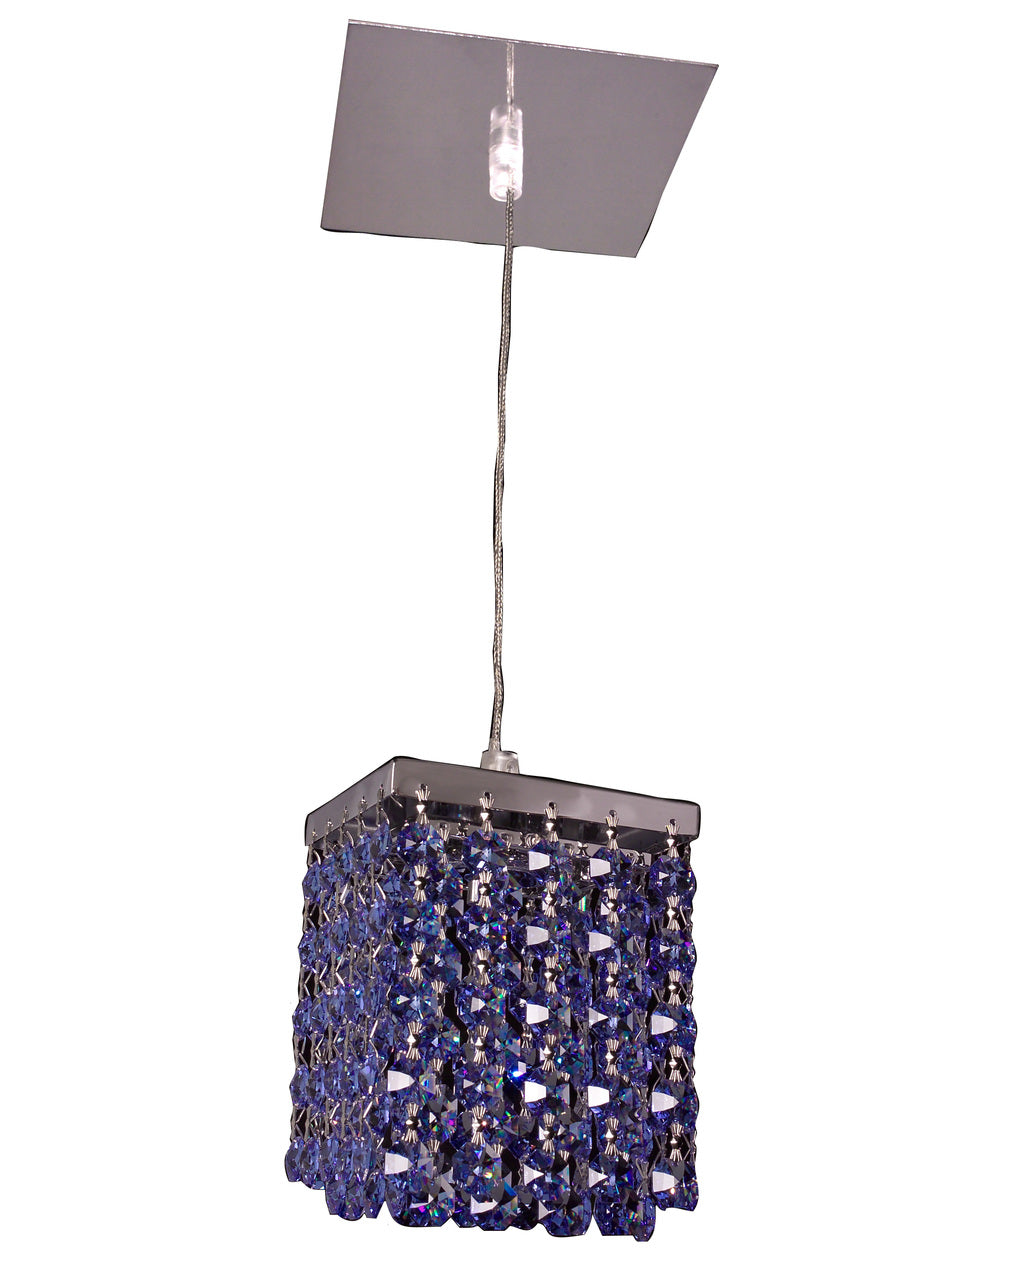 Classic Lighting 16101 SMS-S Bedazzle Crystal Pendant in Chrome